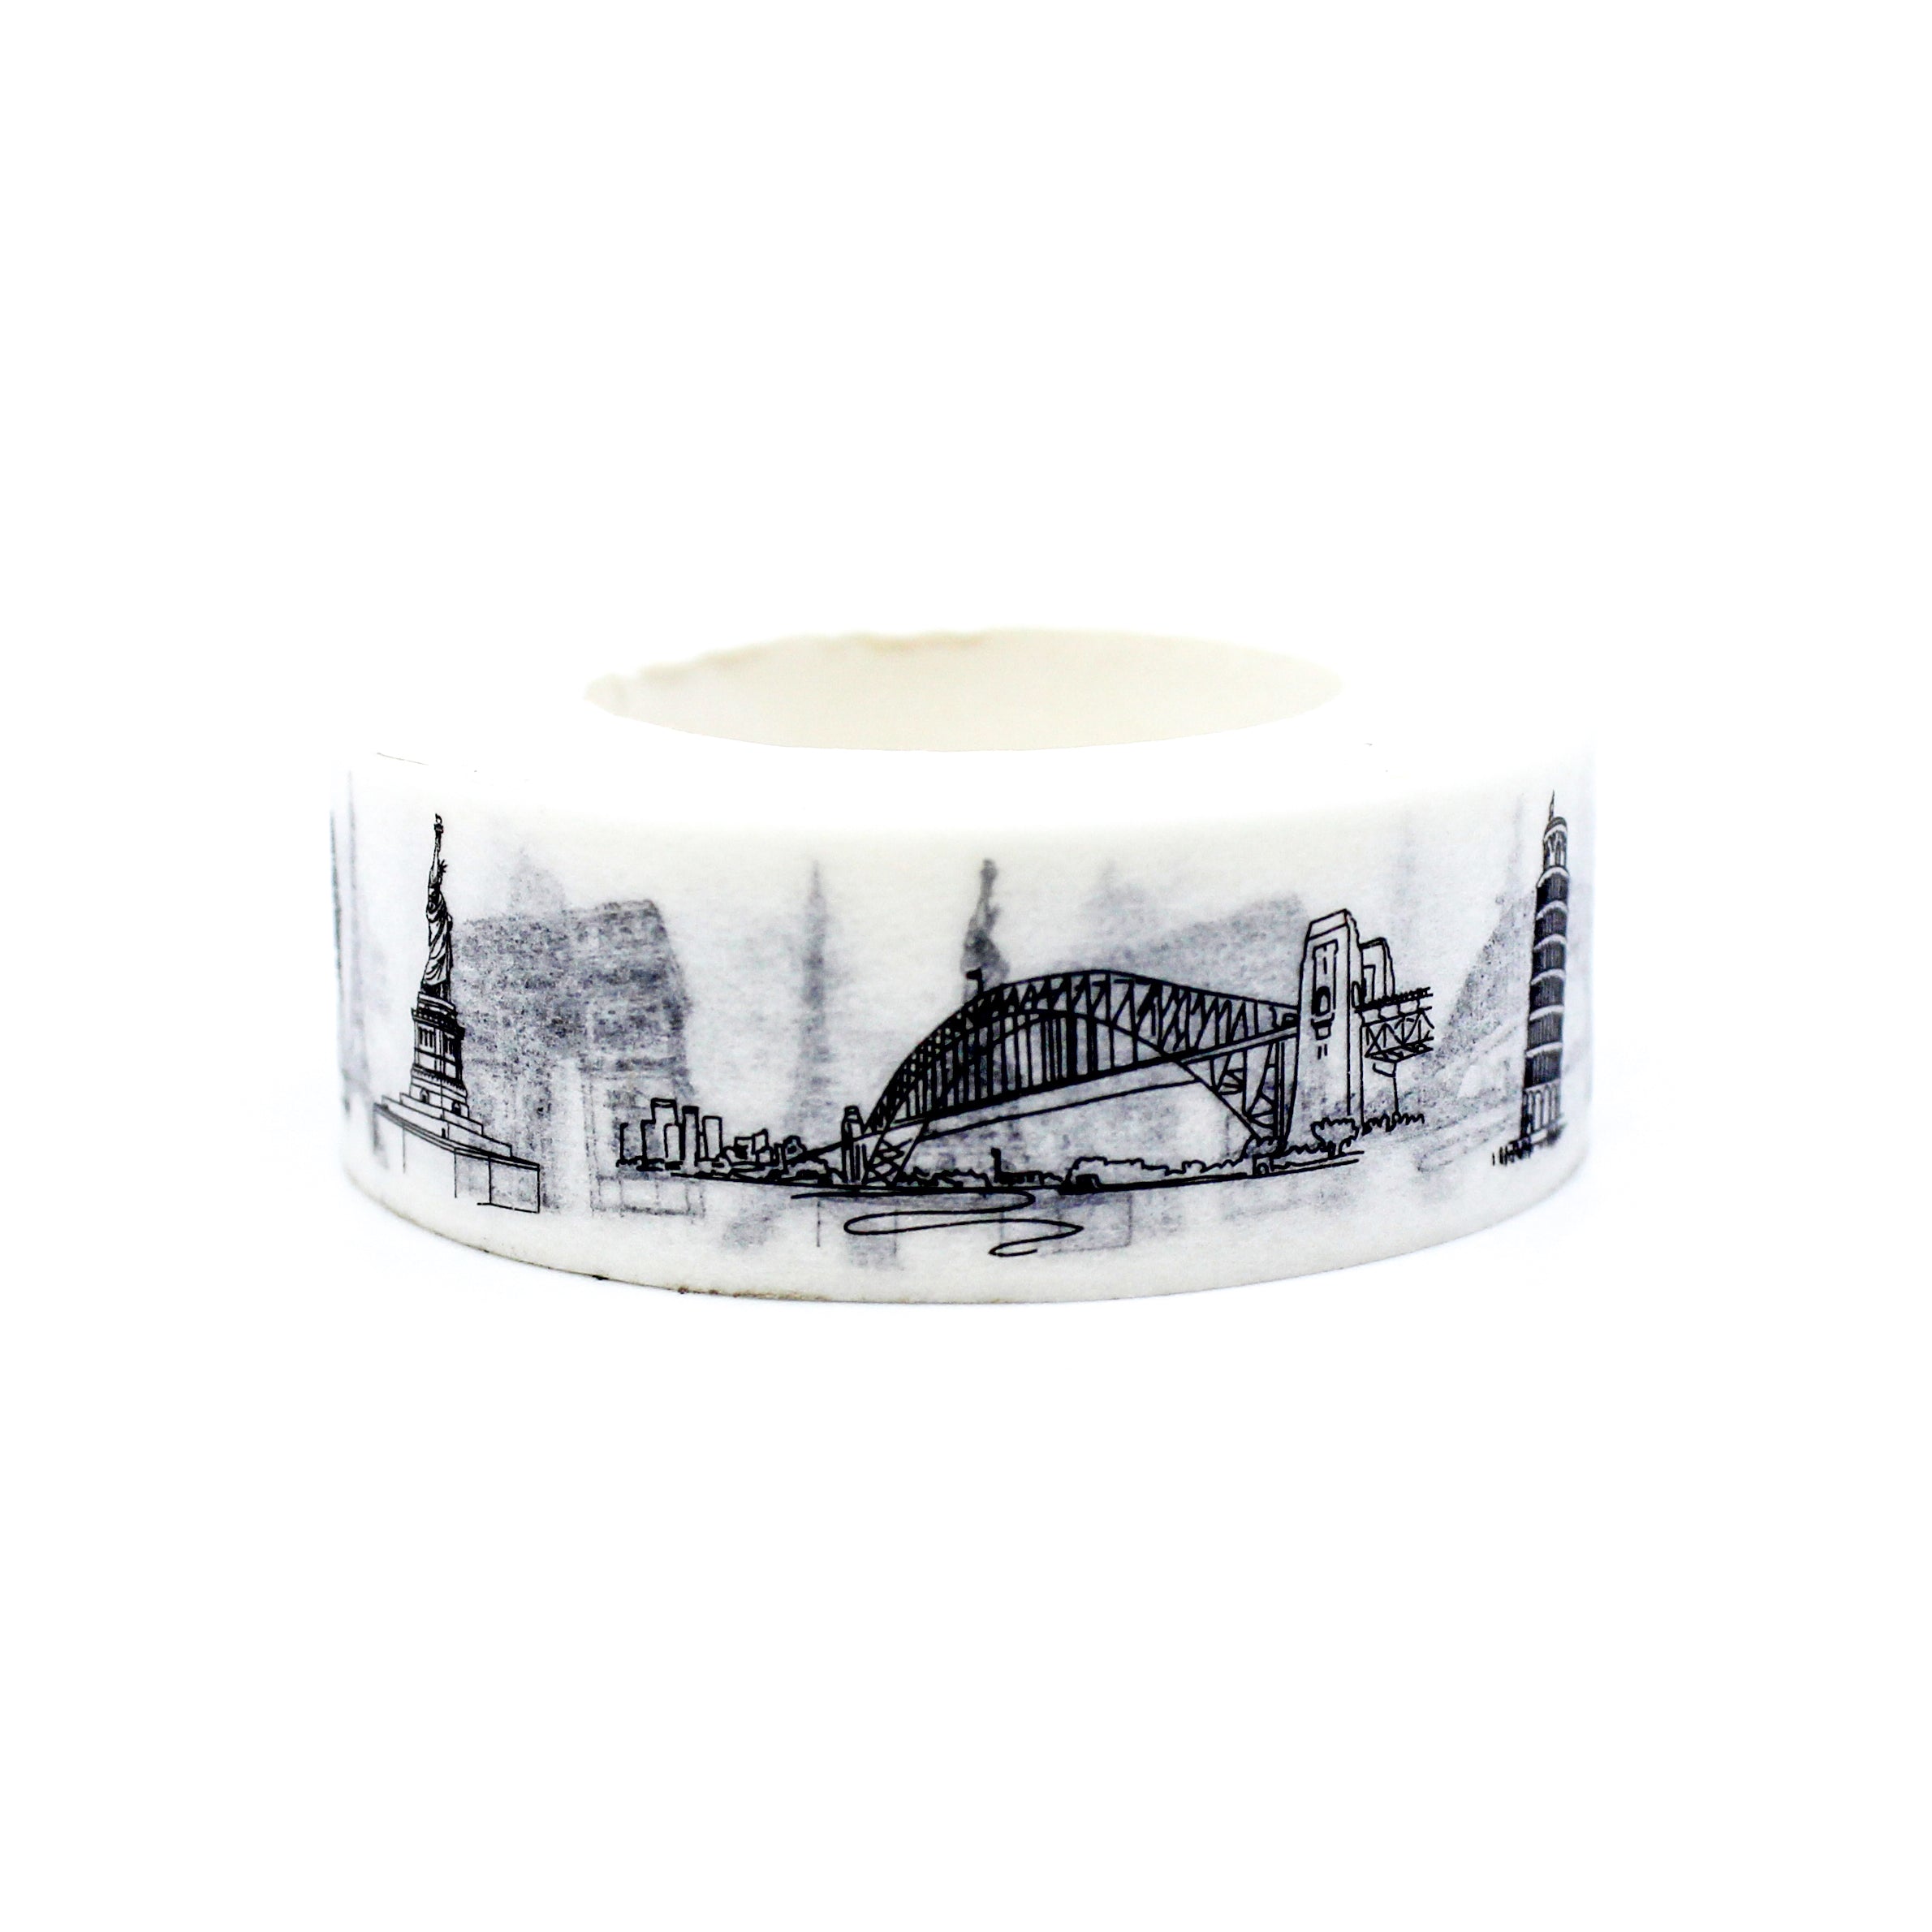 This a collection of places to view of travel destinations and wonders of the world washi tape from BBB Supplies Craft Shop